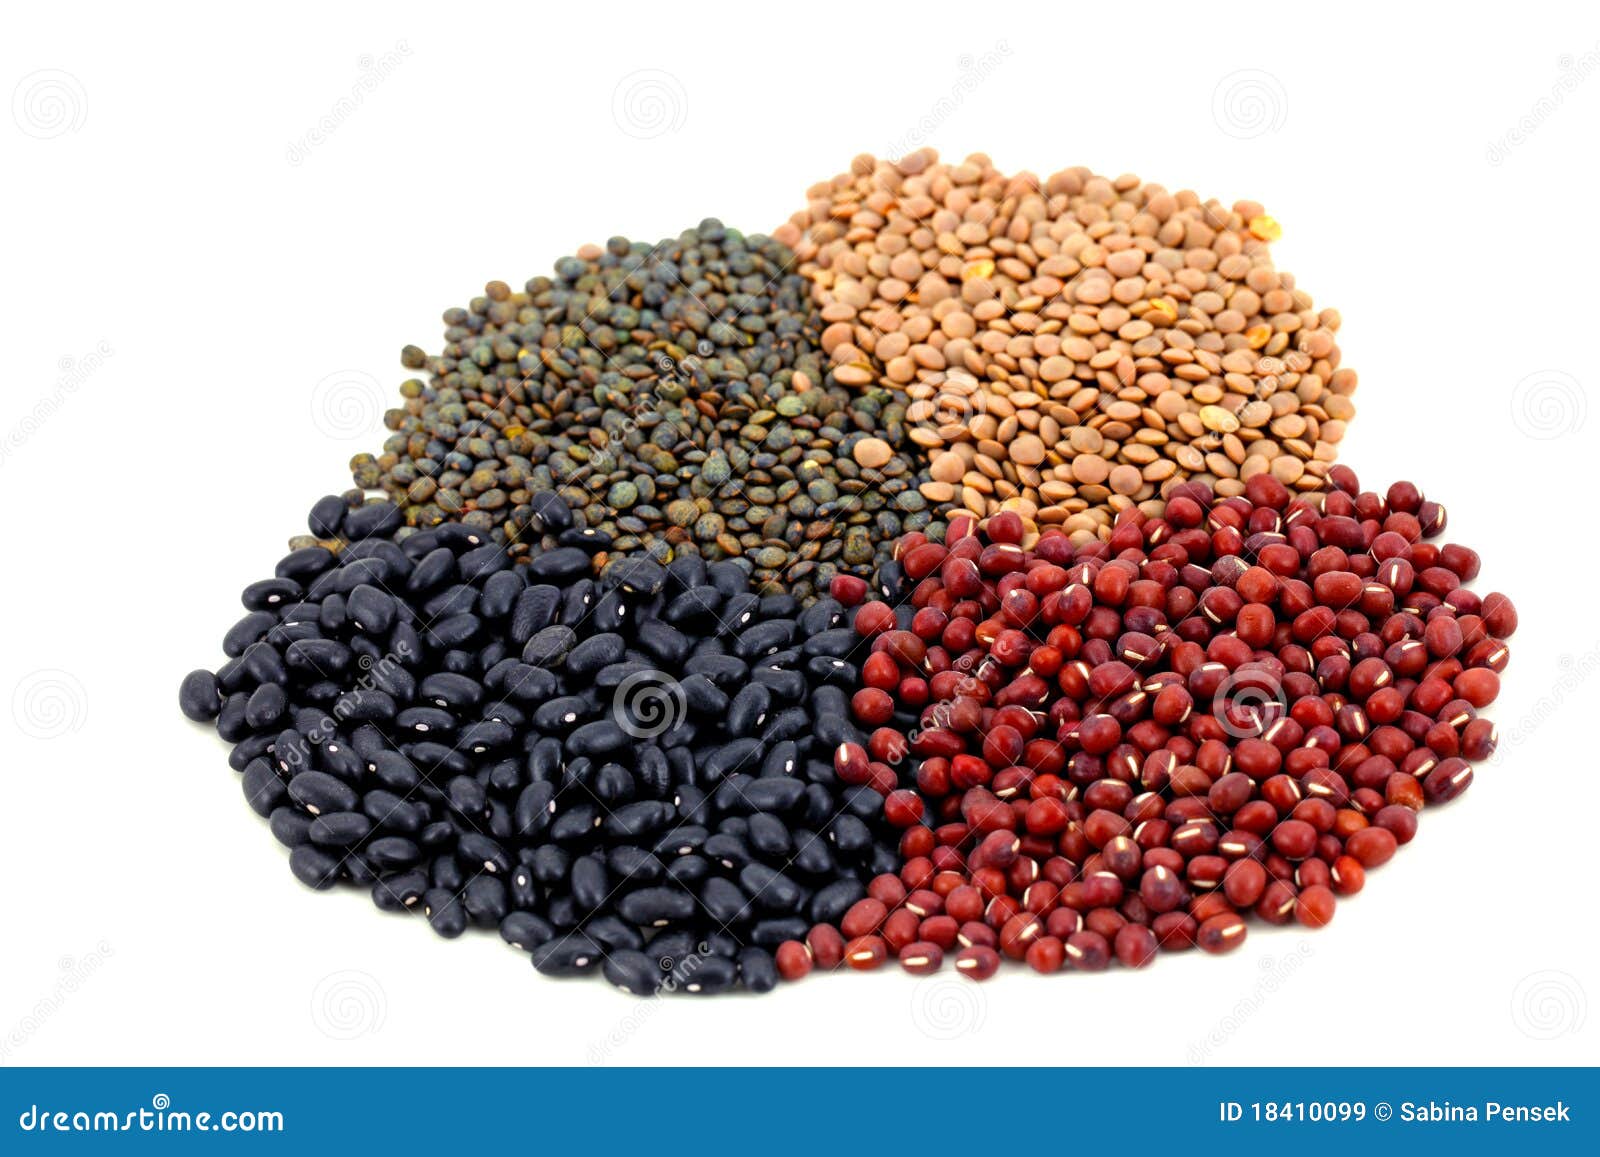 beans and lentils pulse on white